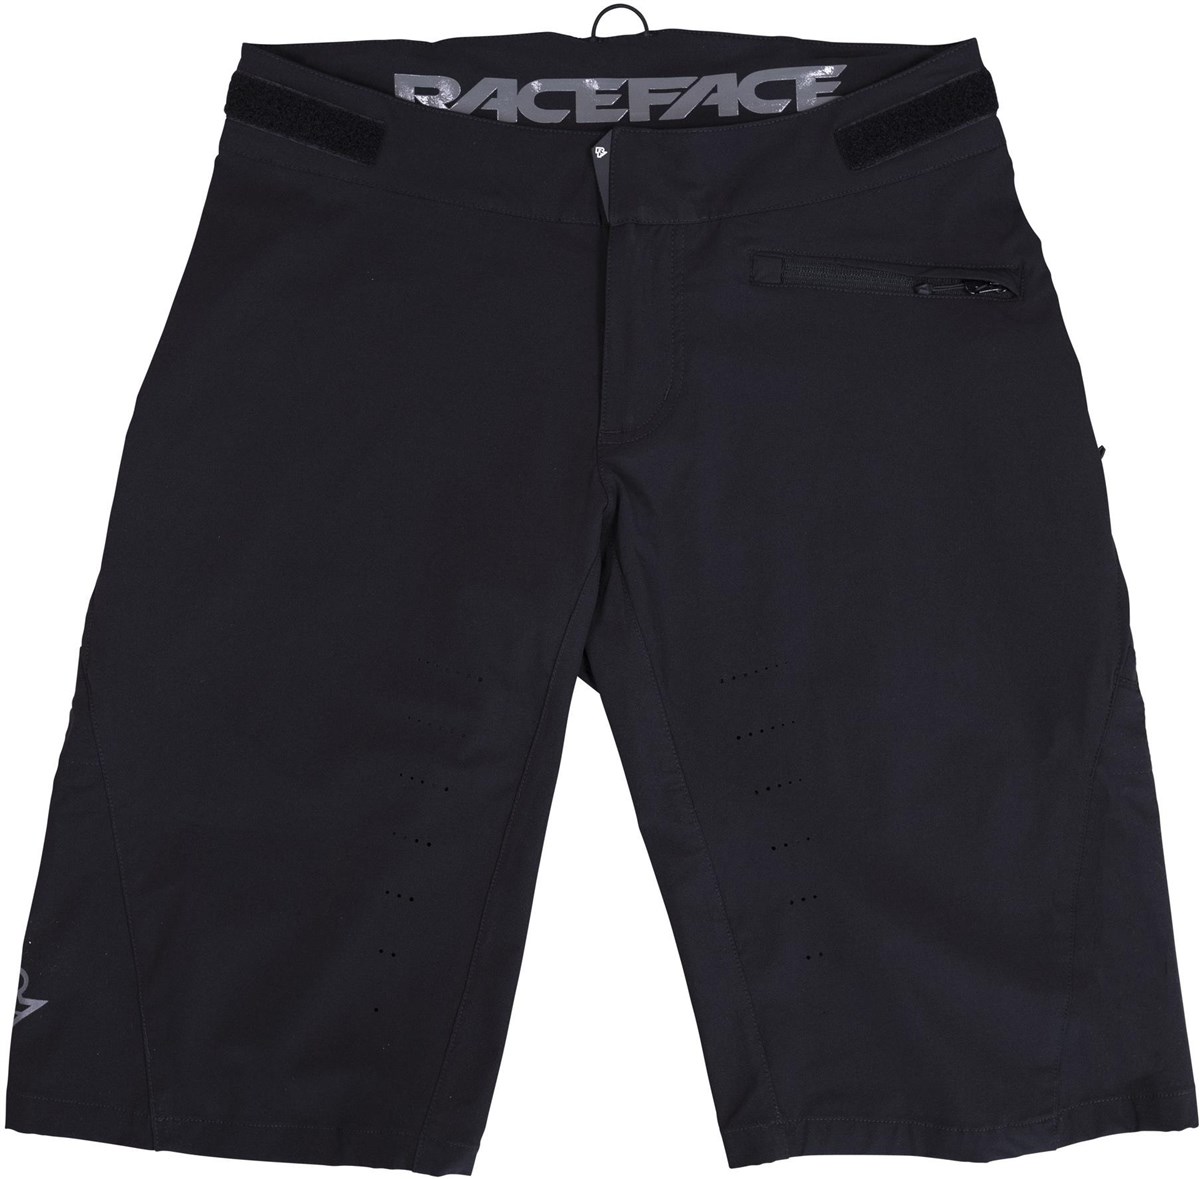 Race Face Indy Womens Cycling Shorts product image